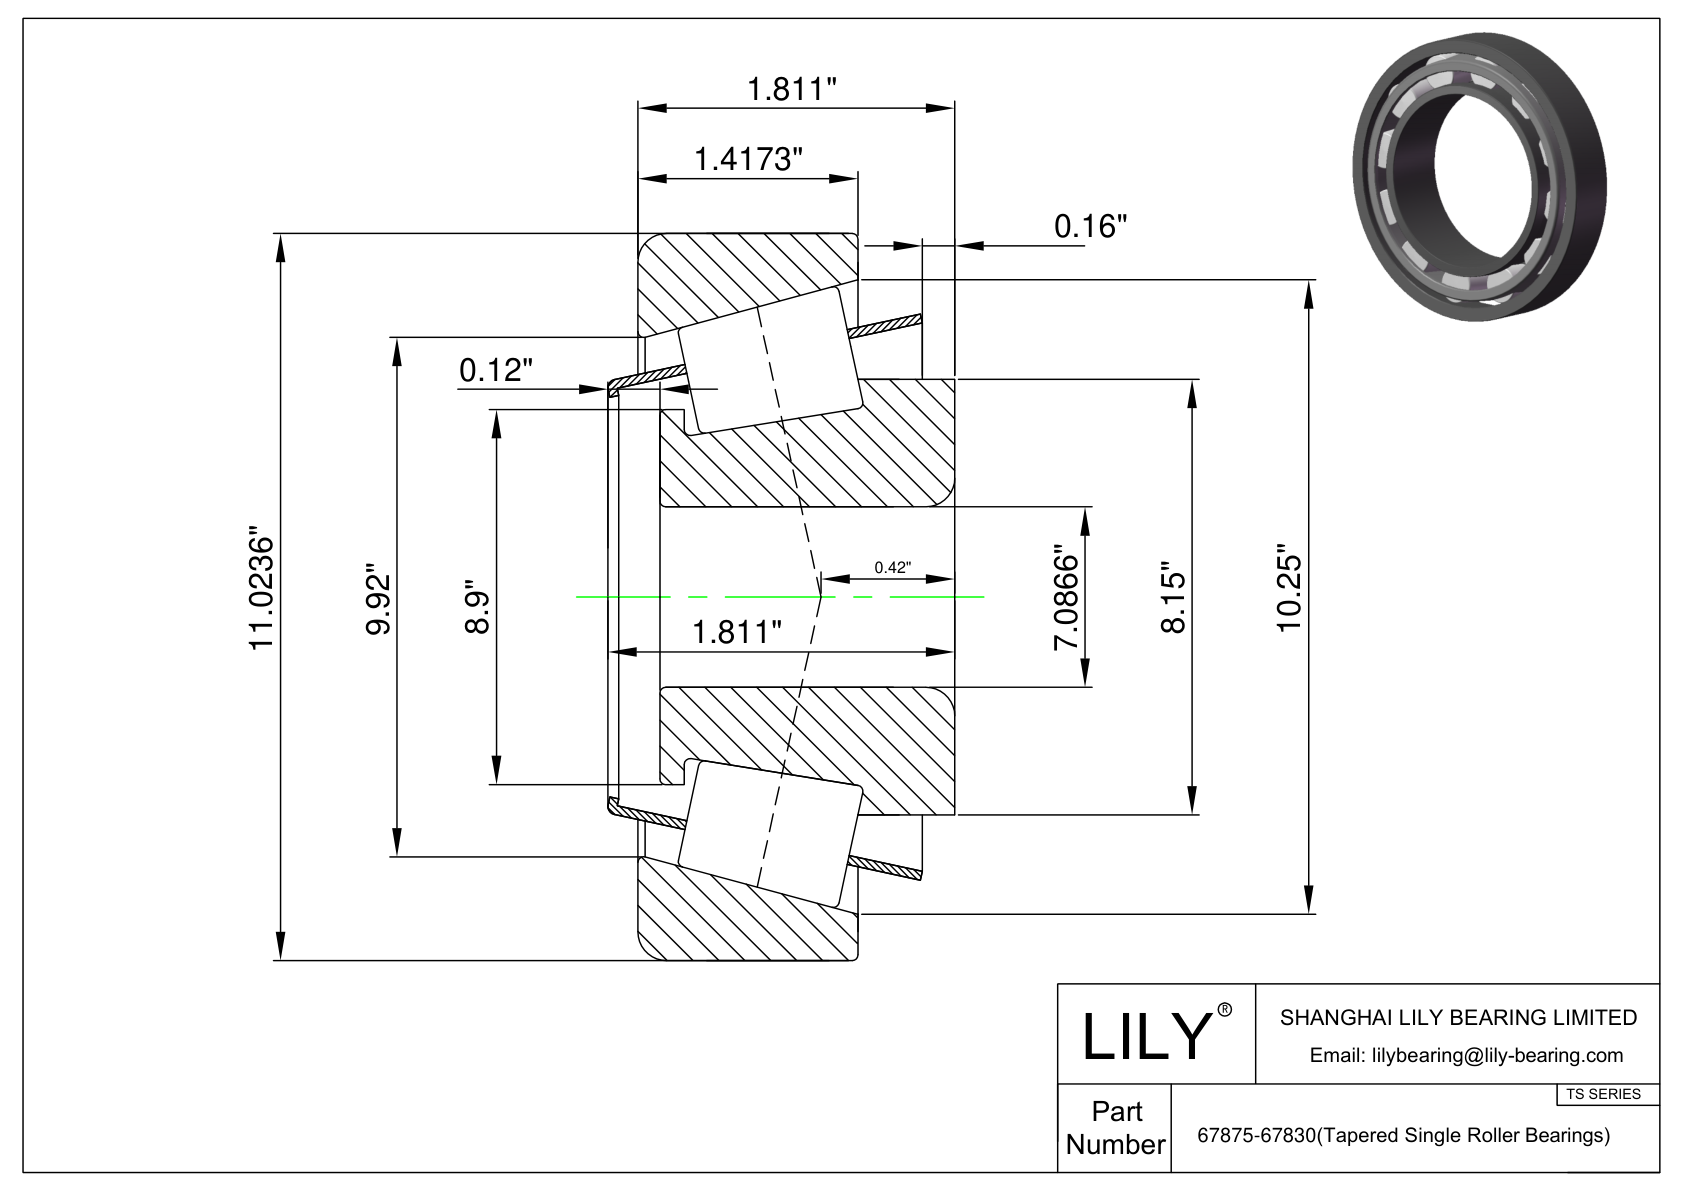 67875-67830 TS (Tapered Single Roller Bearings) (Imperial) cad drawing